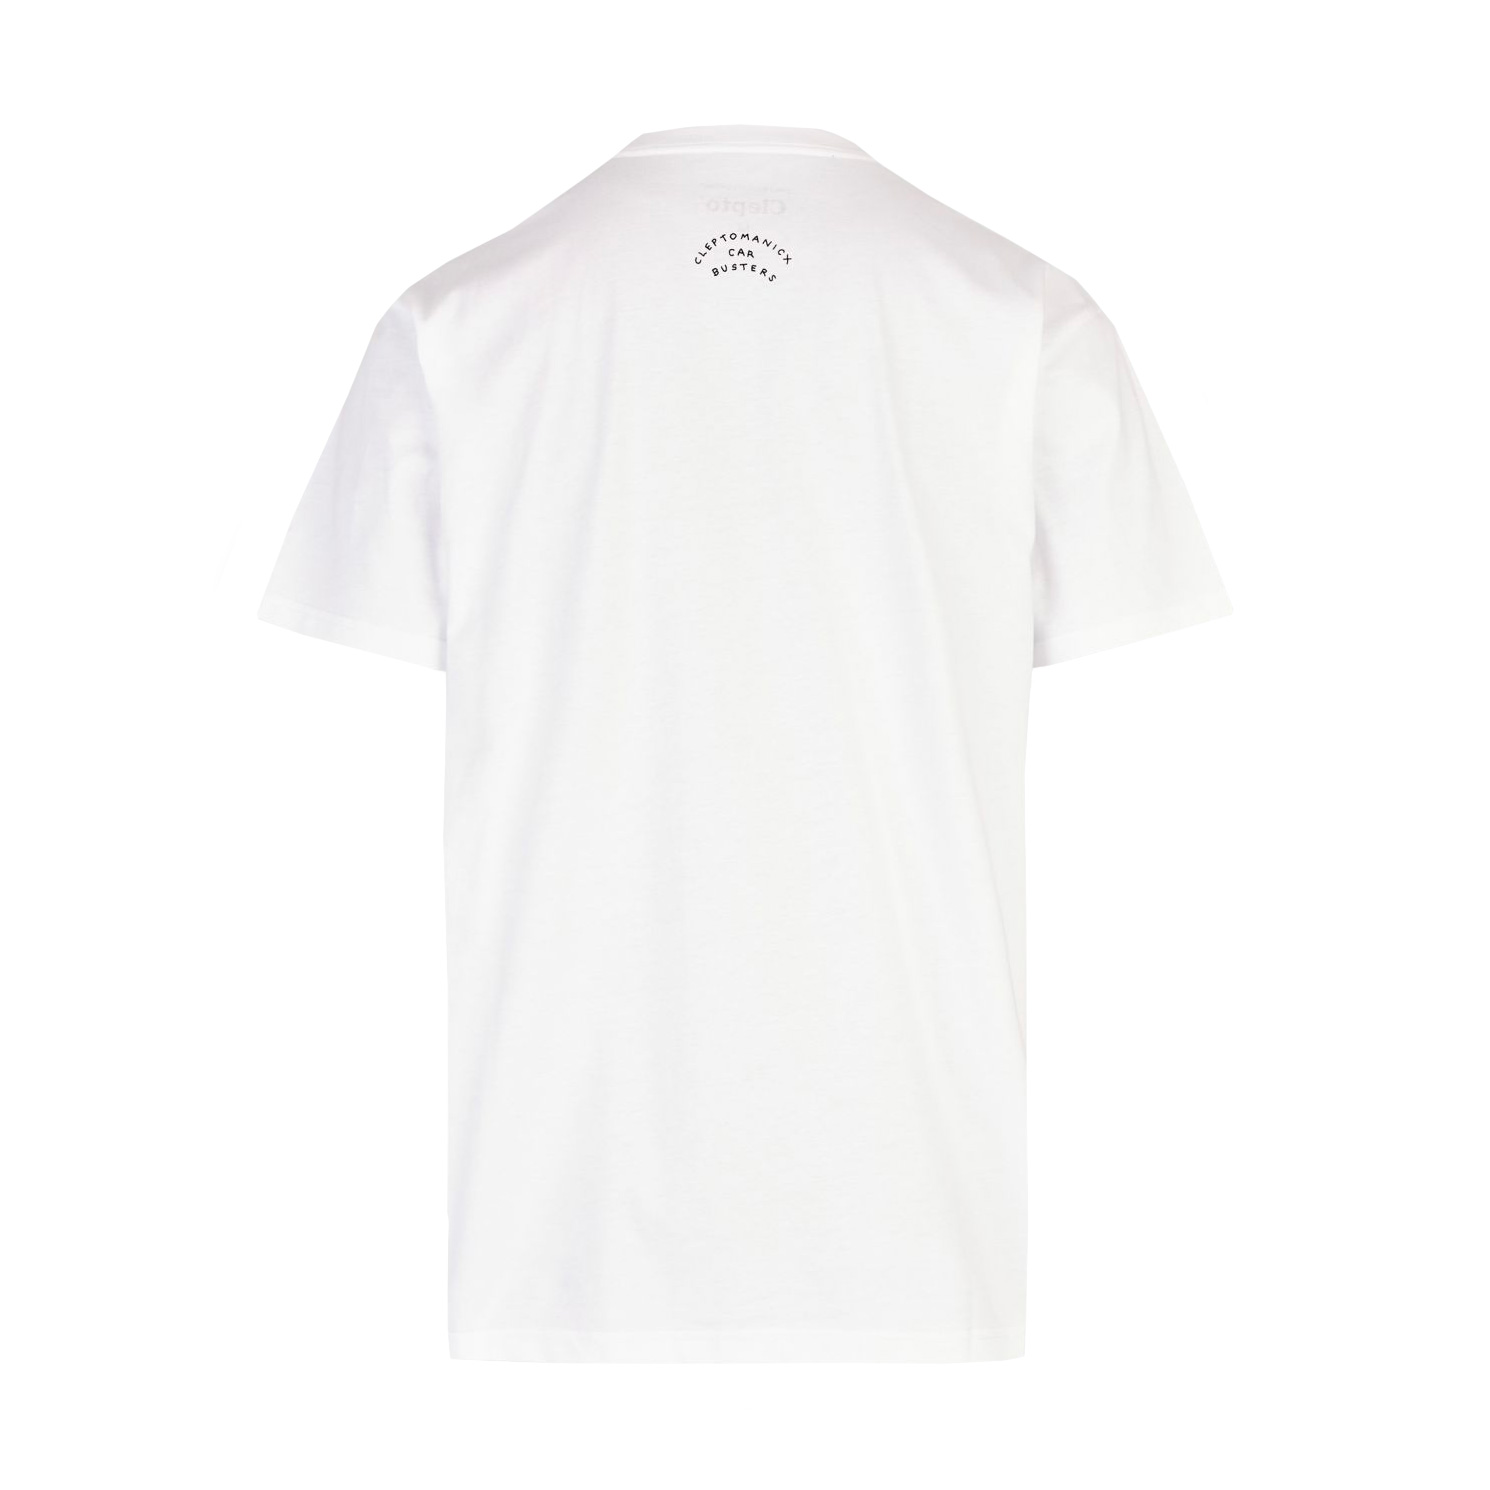 Cleptomanicx T-Shirt Dino Carbuster (white)